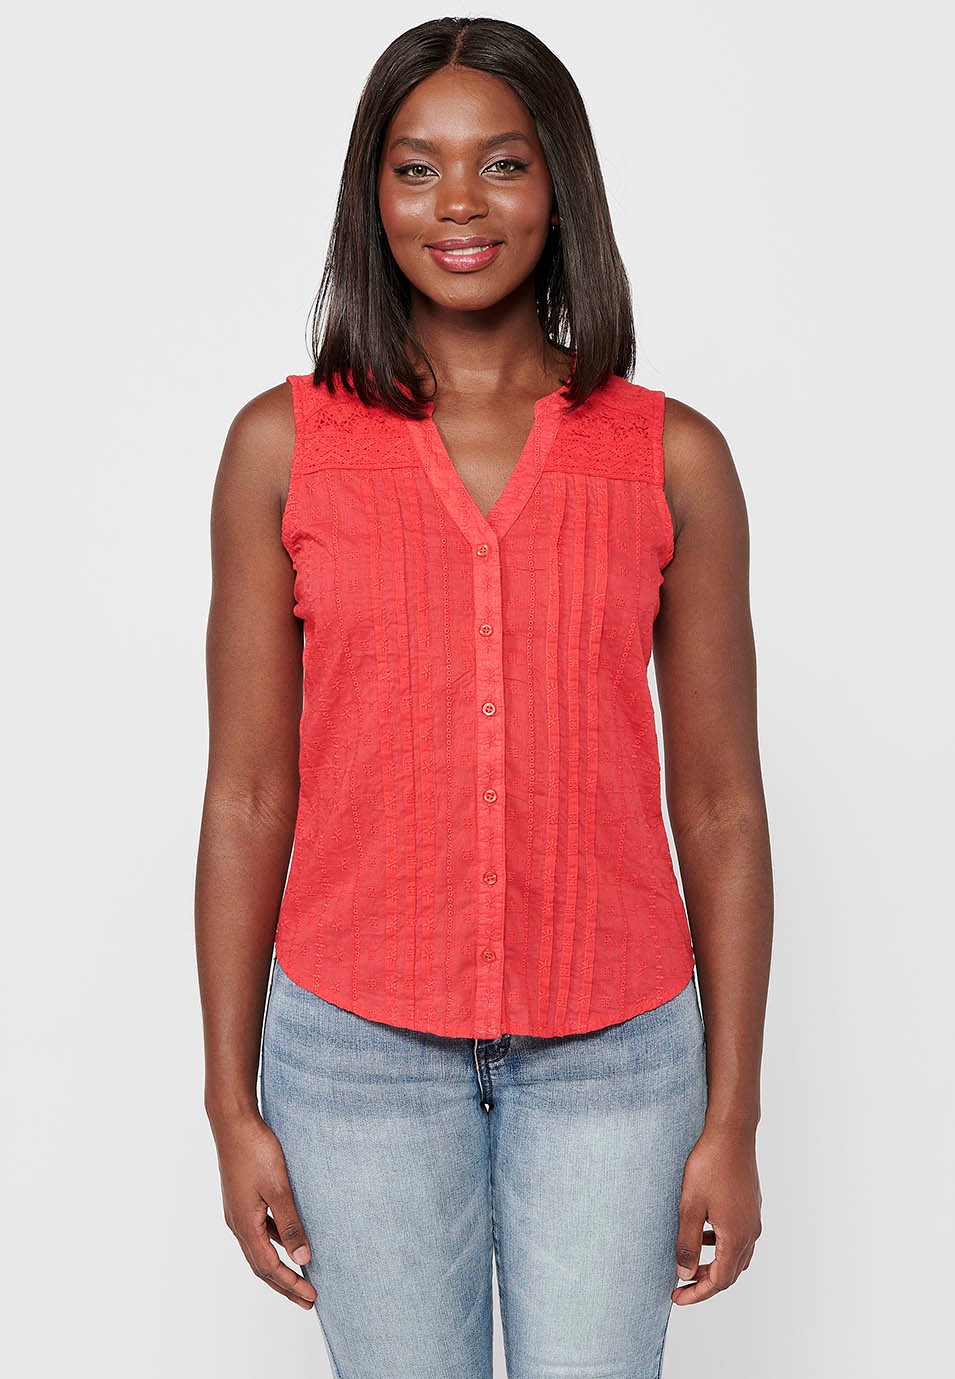 Embroidered Fabric Sleeveless Blouse with V-Neckline and Front Closure with Coral Color Buttons for Women 5